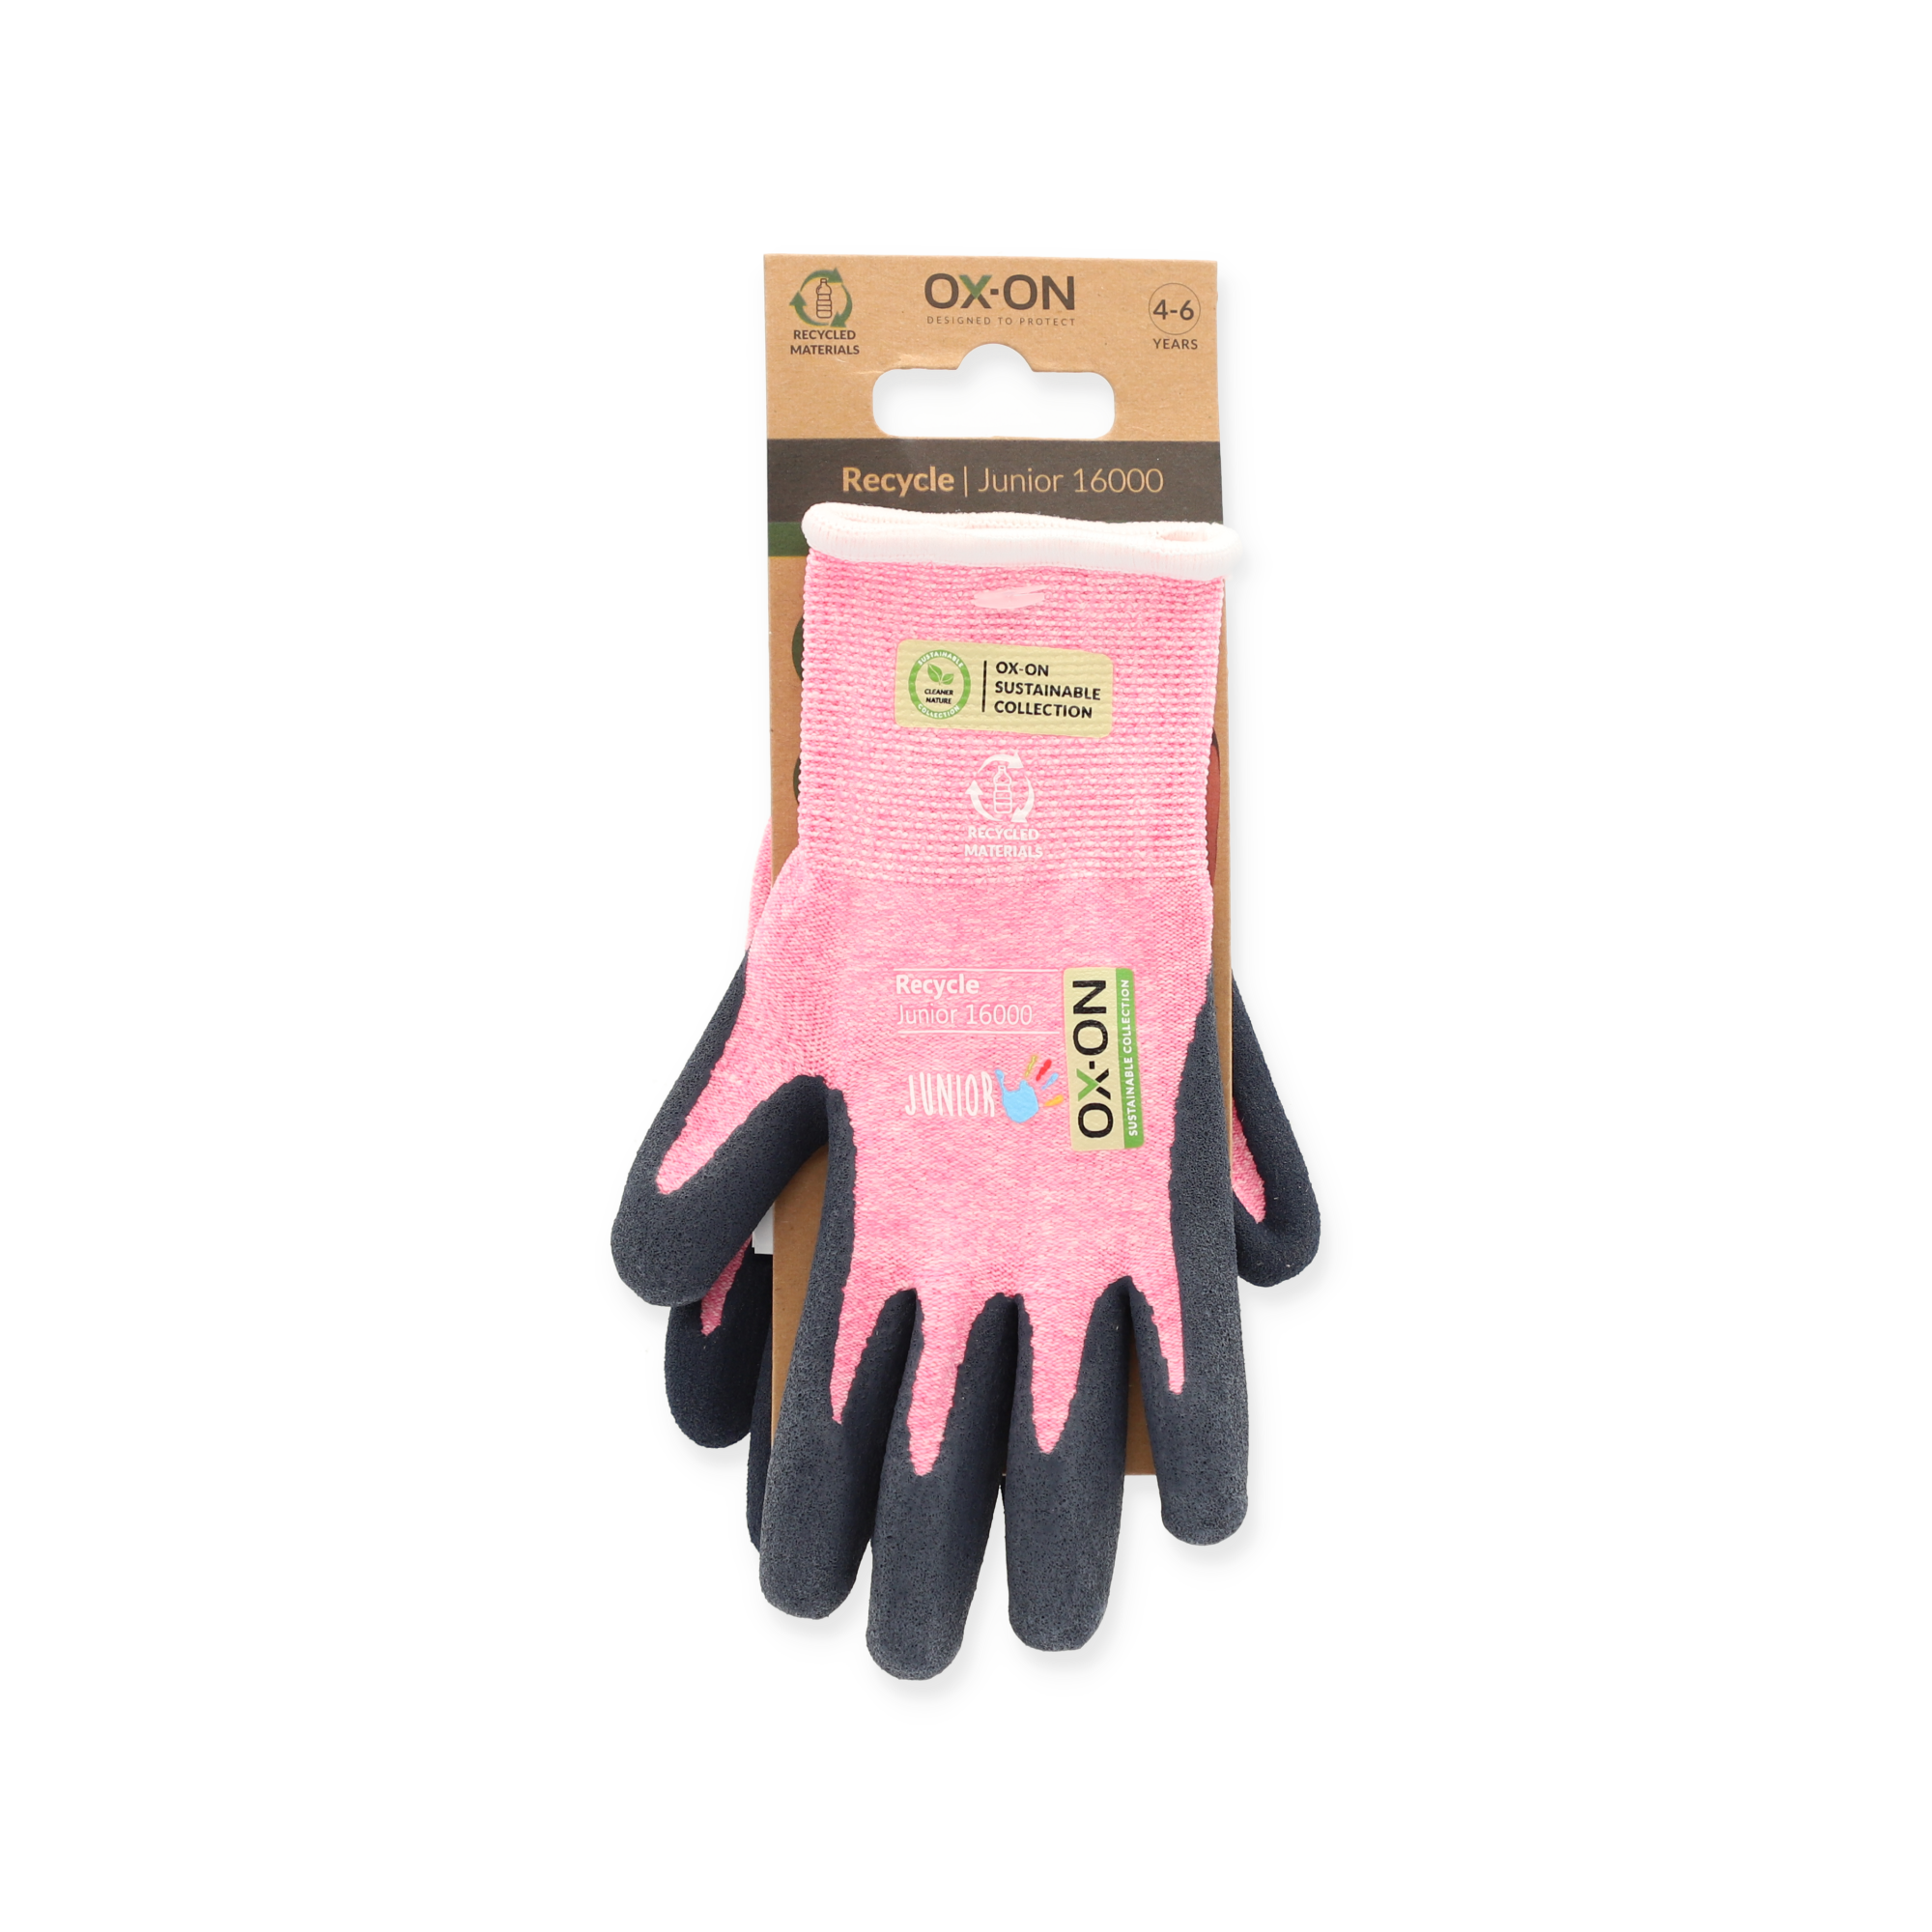 Handschuhe 'Junior 16000' pink 6-8 Jahre + product picture